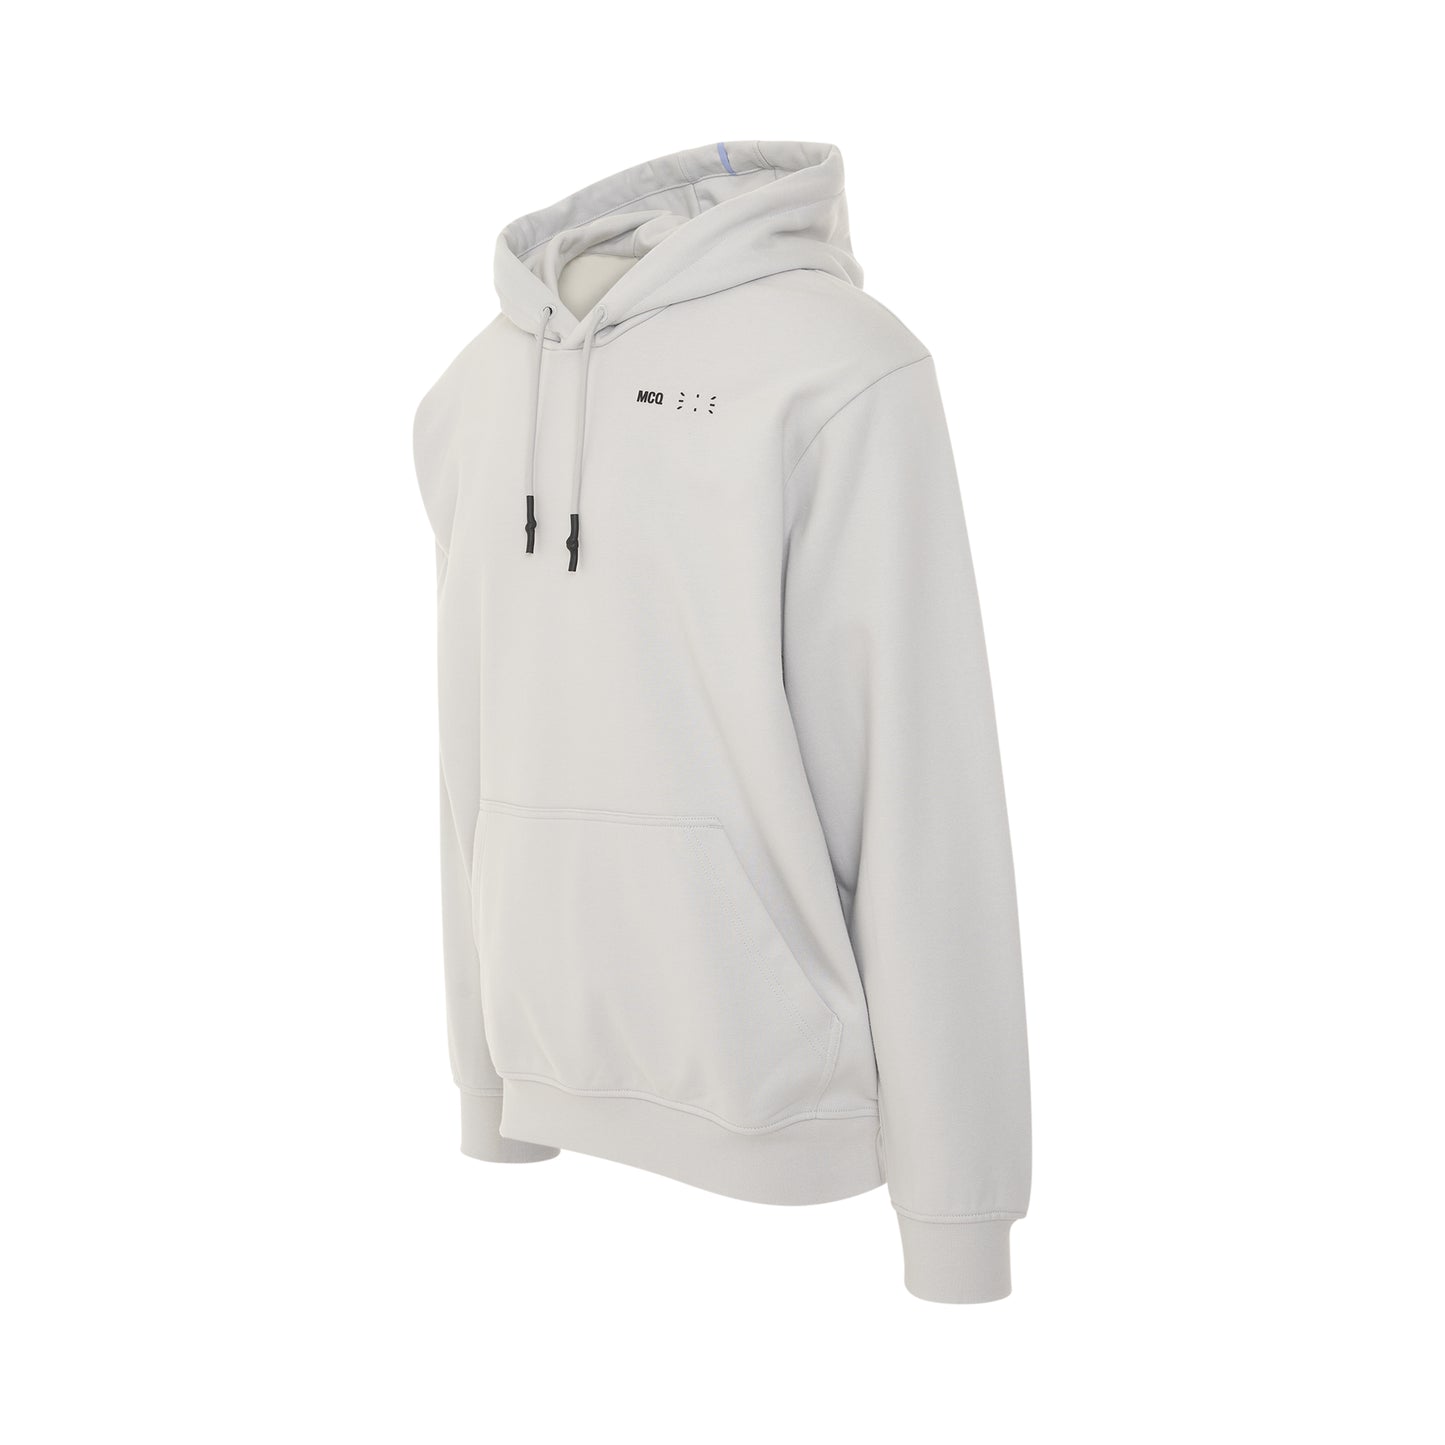 IC0 Embroidered Logo Hoodie in Alloy